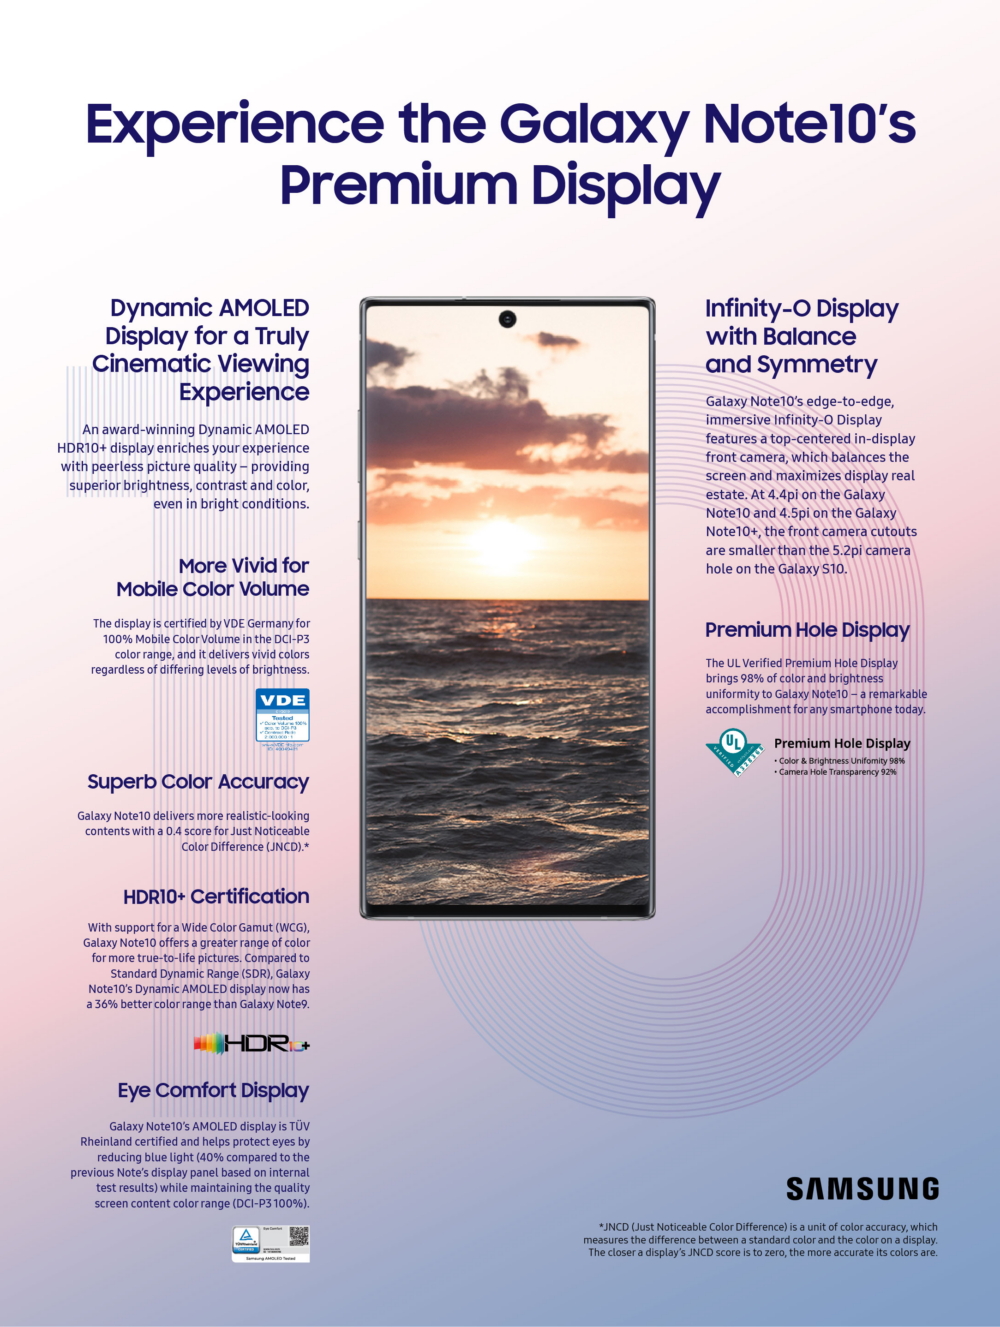 [Infographic] Experience the Galaxy Note10’s Premium Display